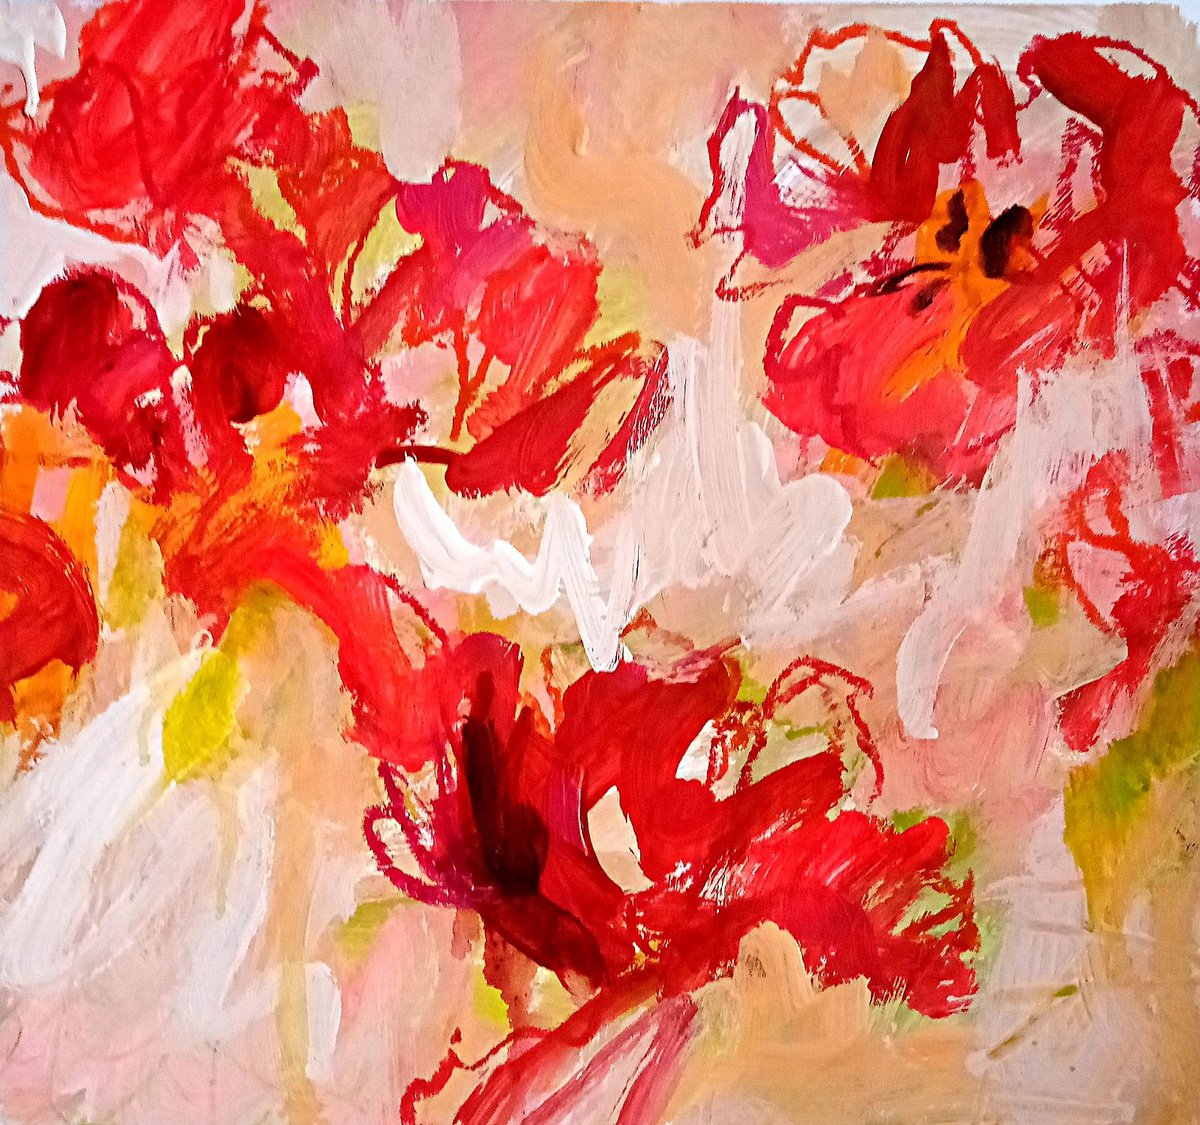 Abstract Red tulips#1/2022 by Valerie Lazareva